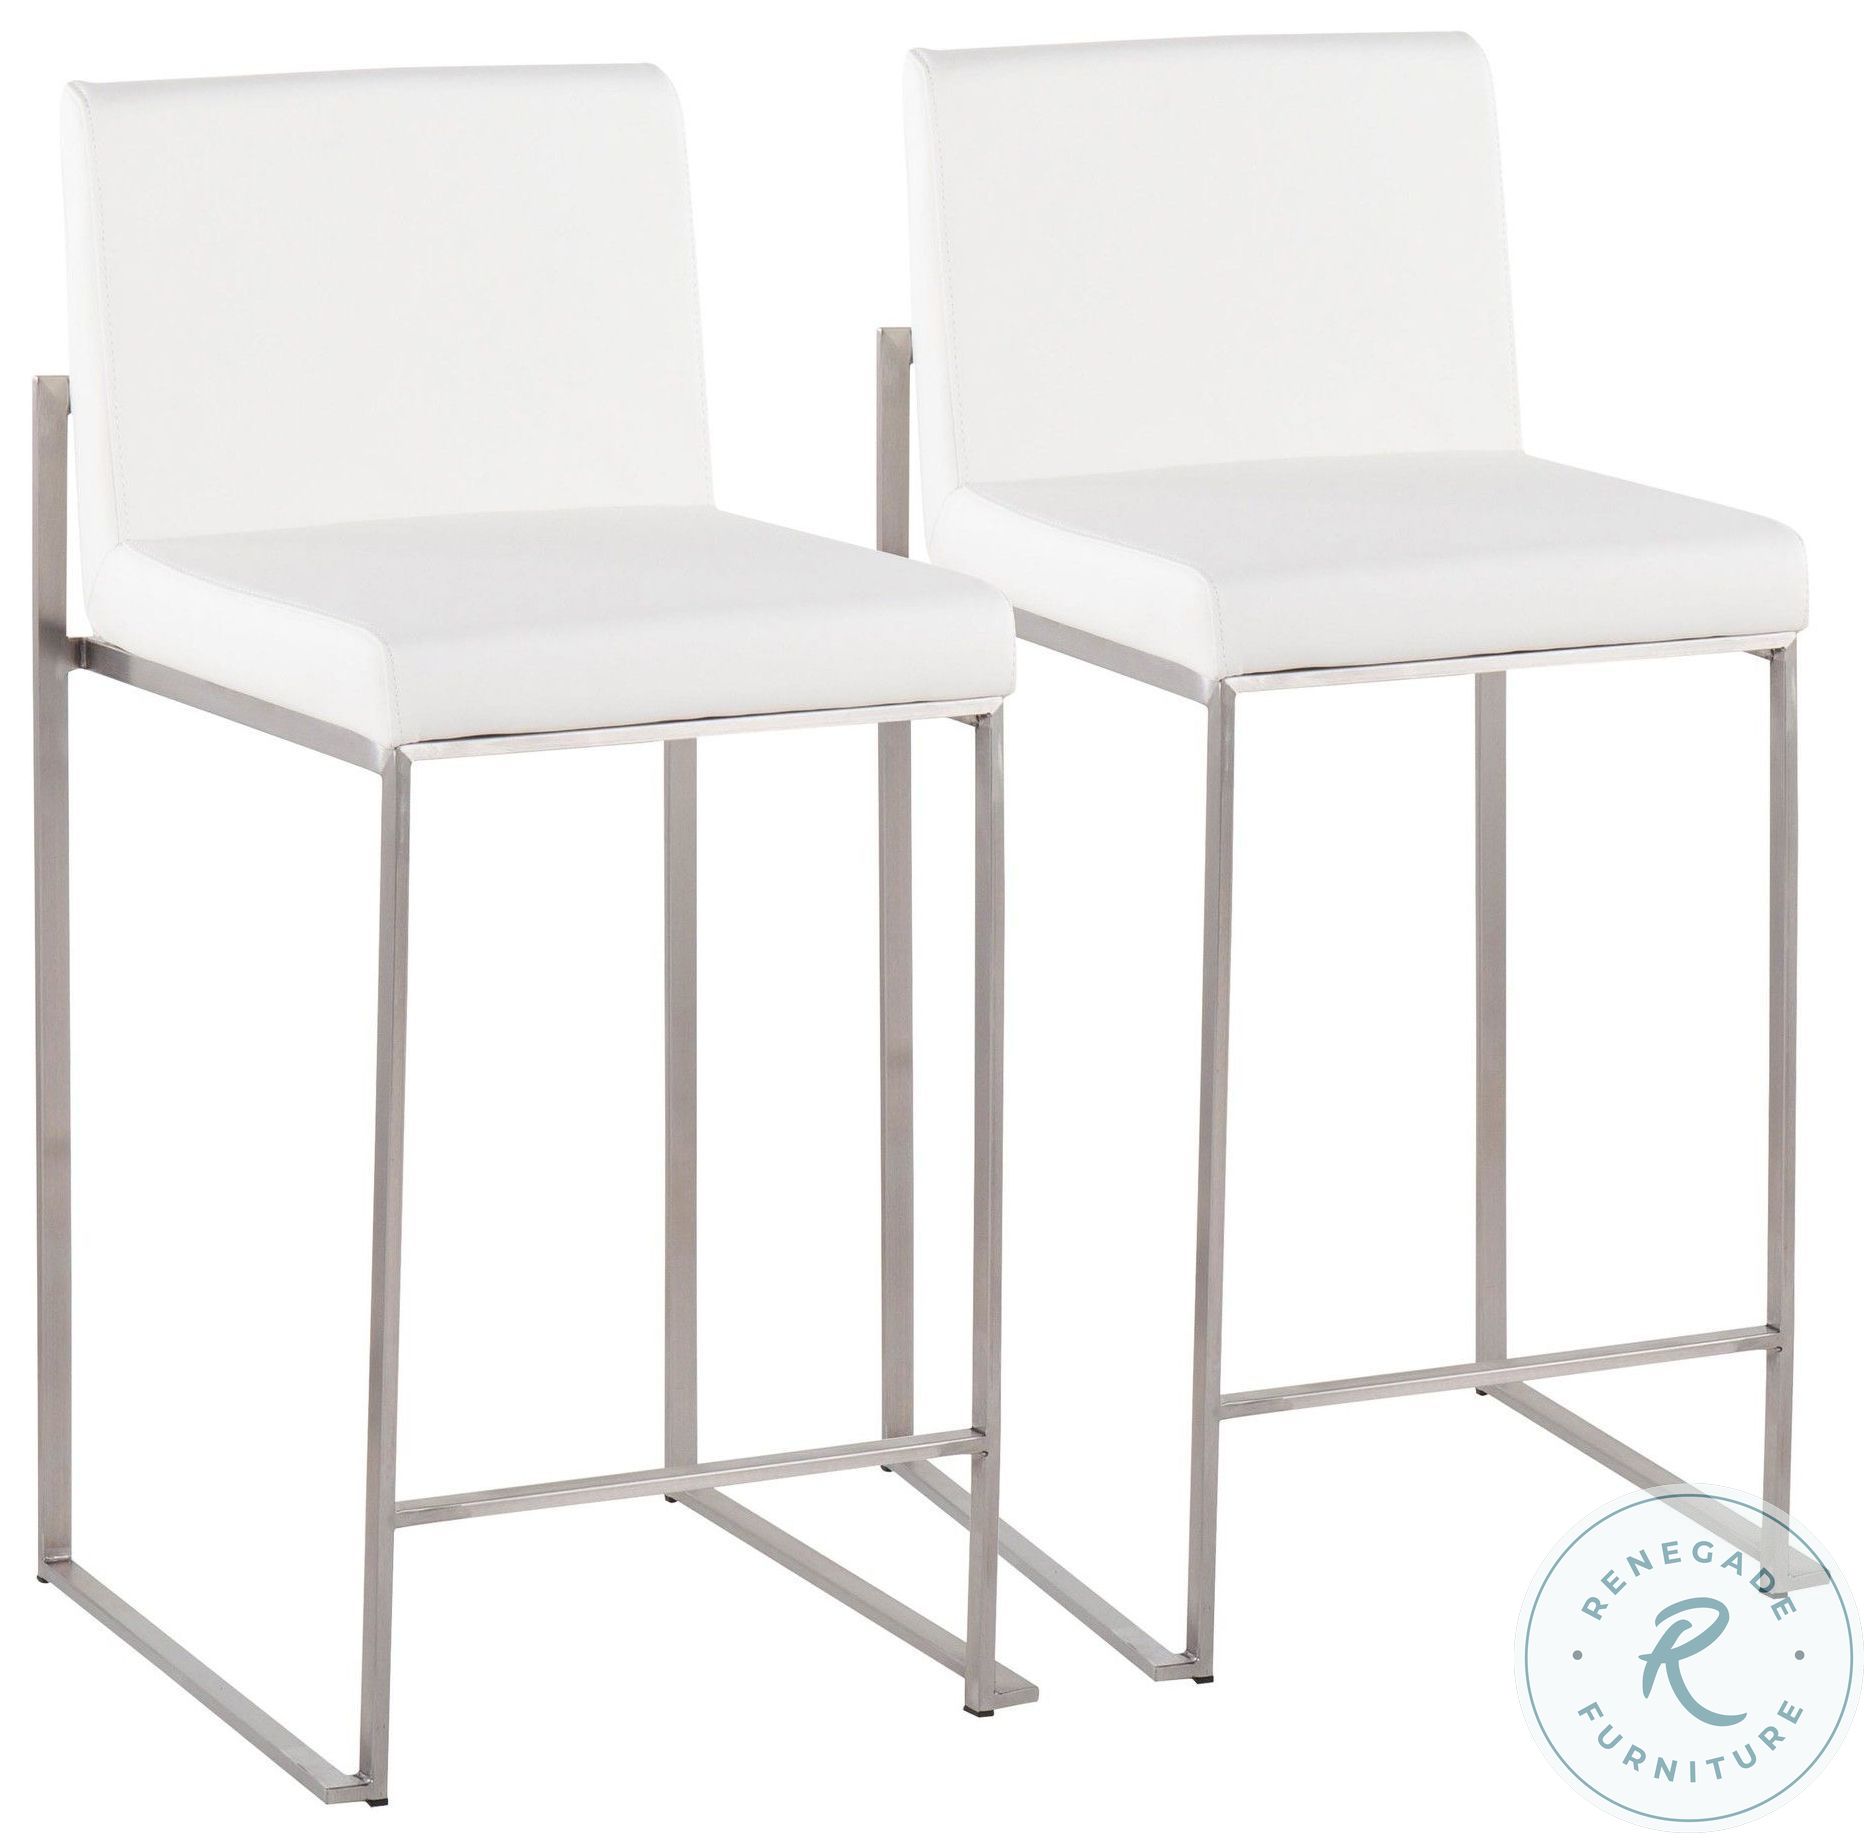 Fuji White PU And Stainless Steel High Back Counter Height Stool Set of 2